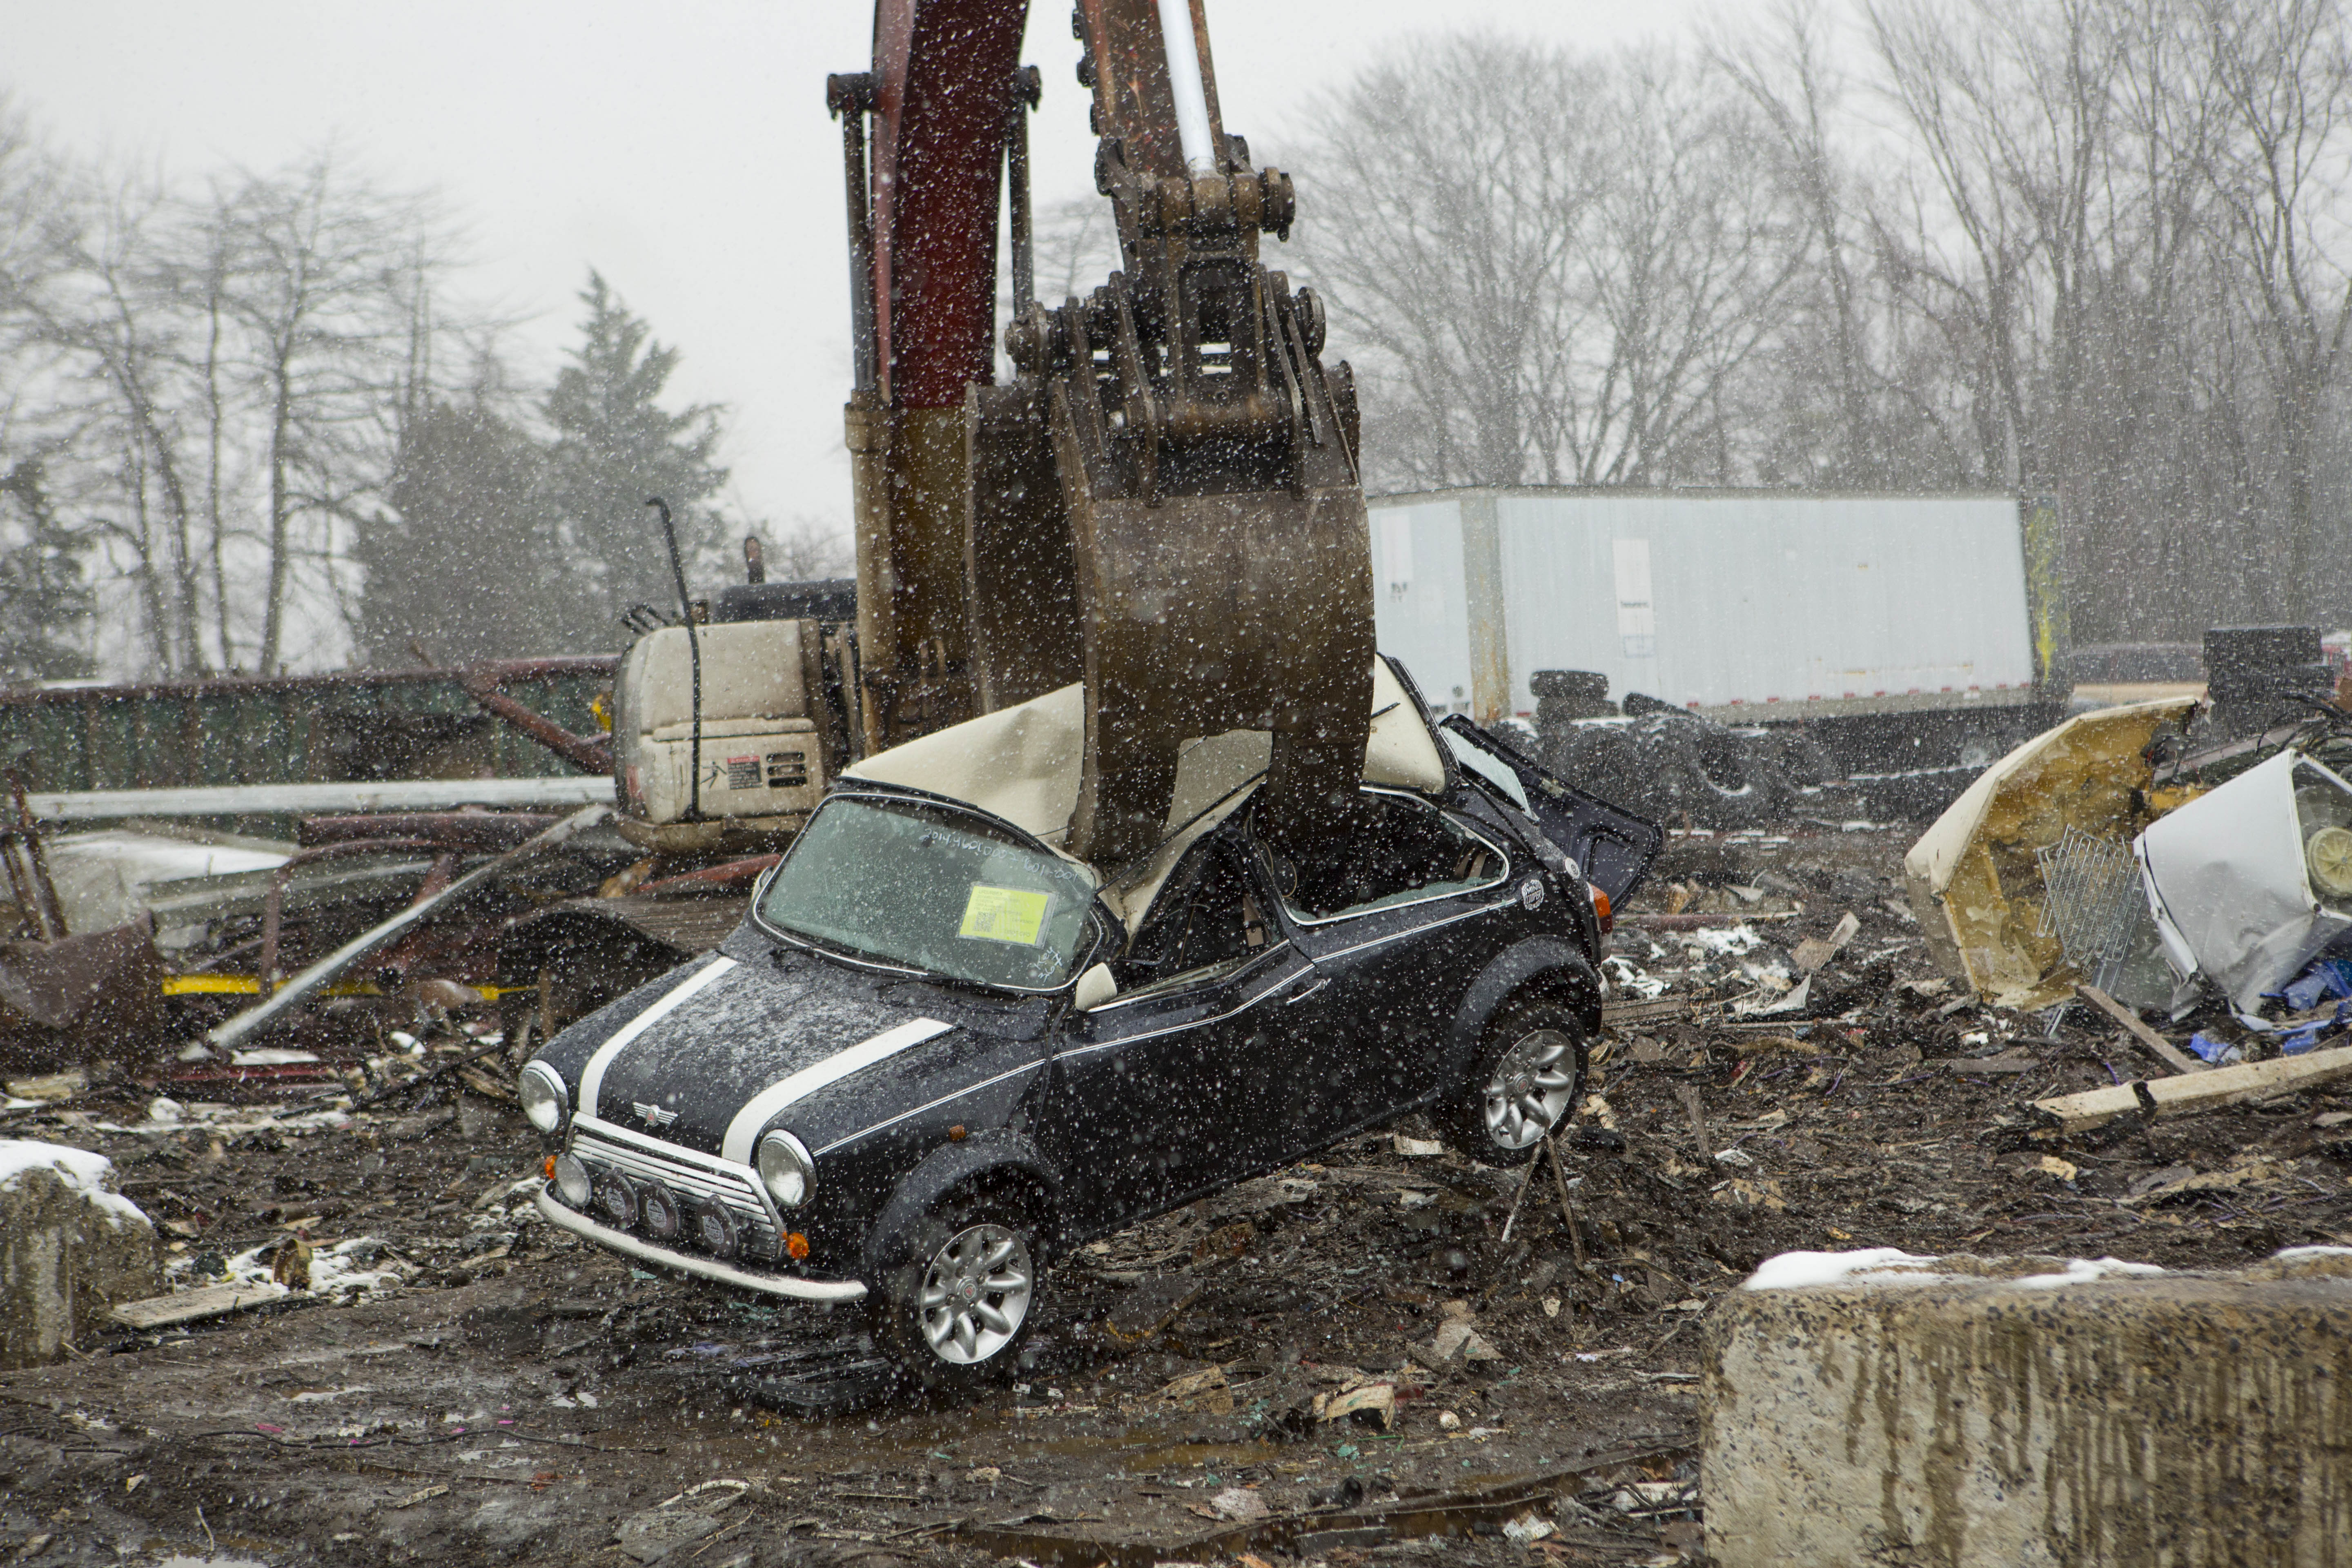 U.S. Customs and Border Protection in conjunction with British Authorities destroy a Mini Cooper that had many violations related to importation. Photo Credit: James Tourtellotte.